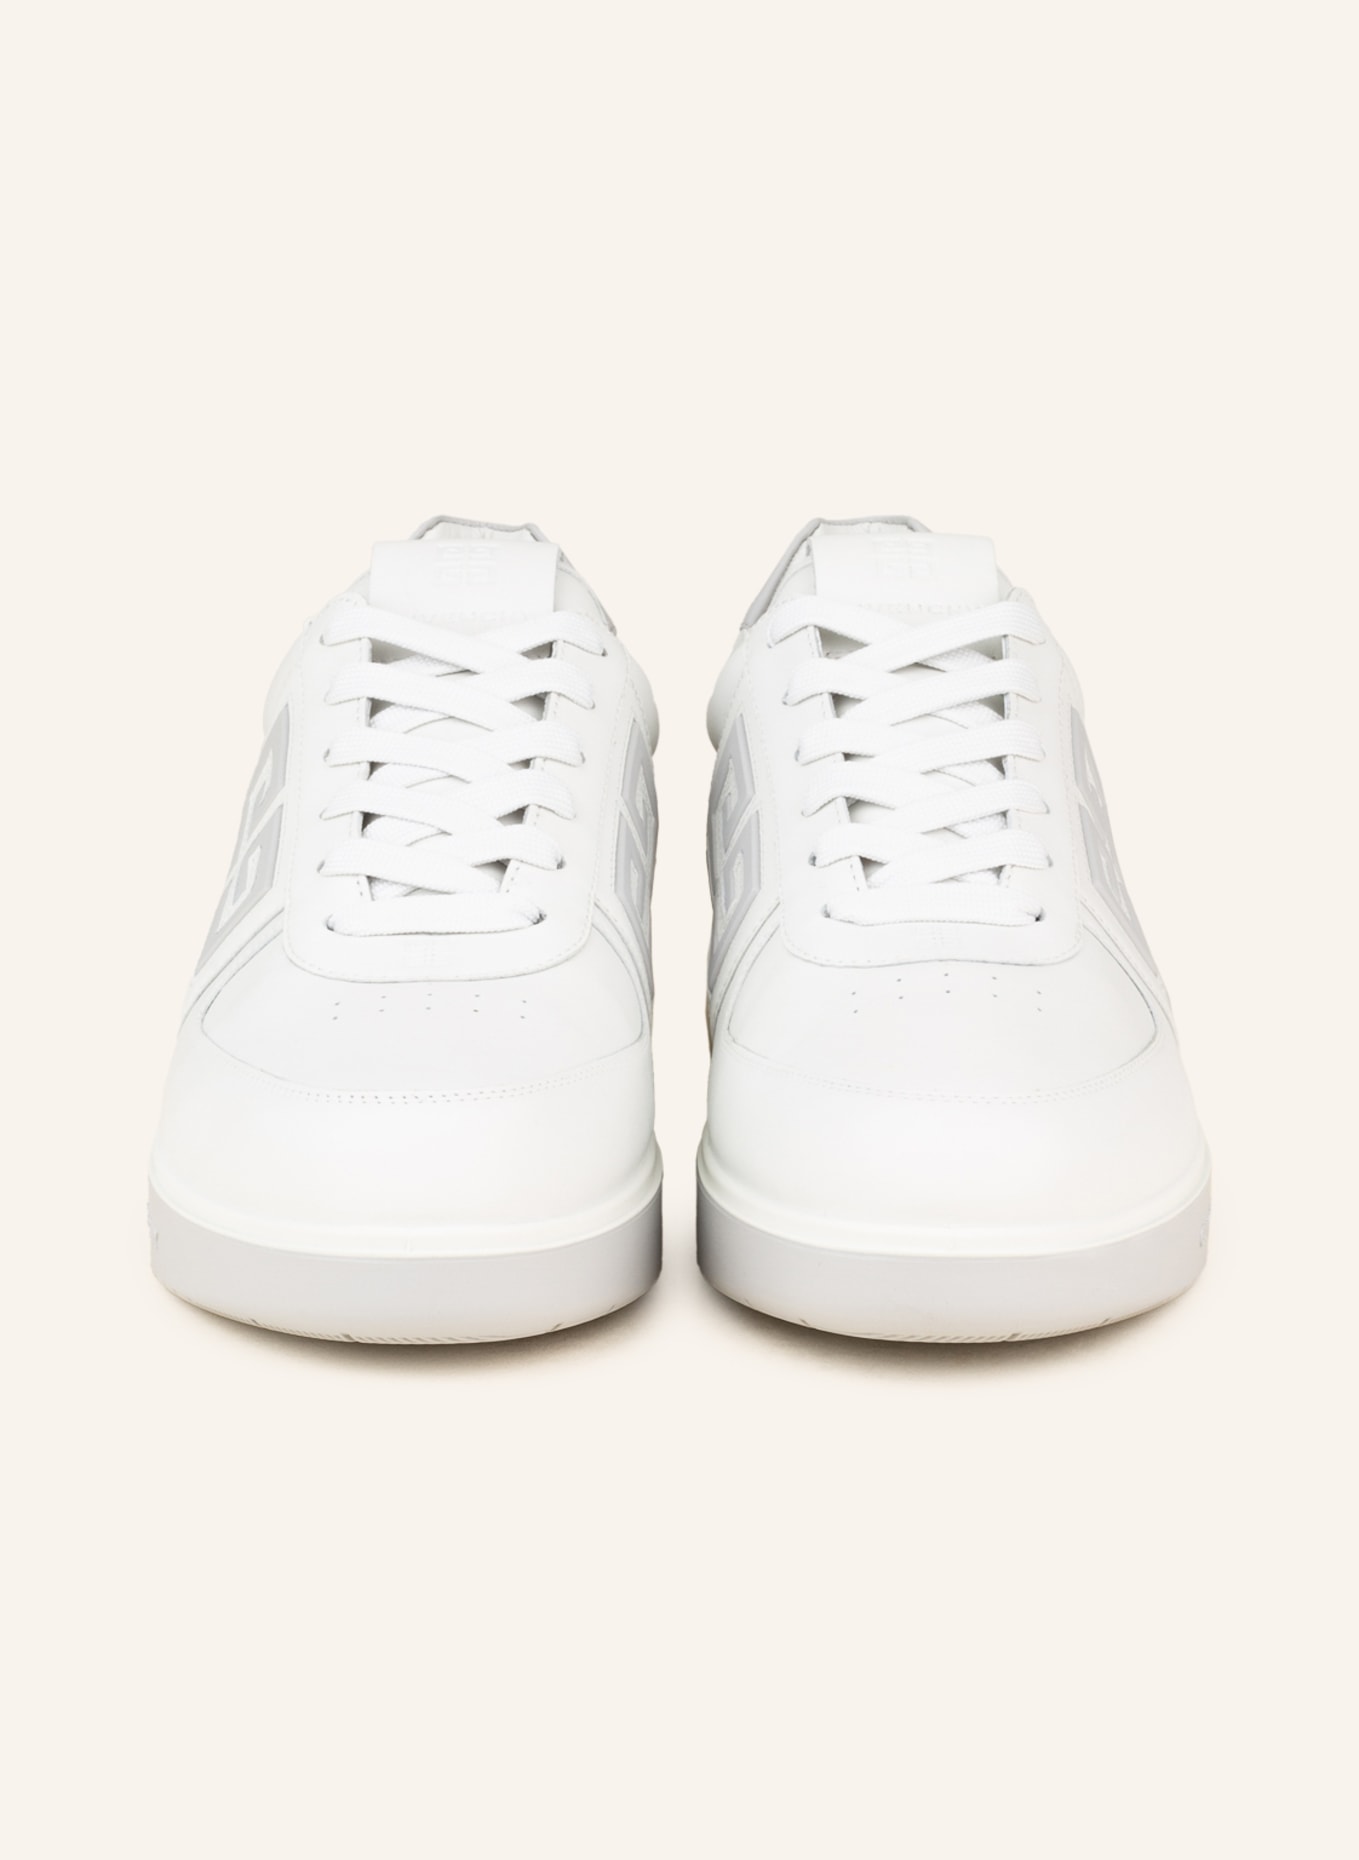 GIVENCHY Sneaker G4, Farbe: WEISS (Bild 3)